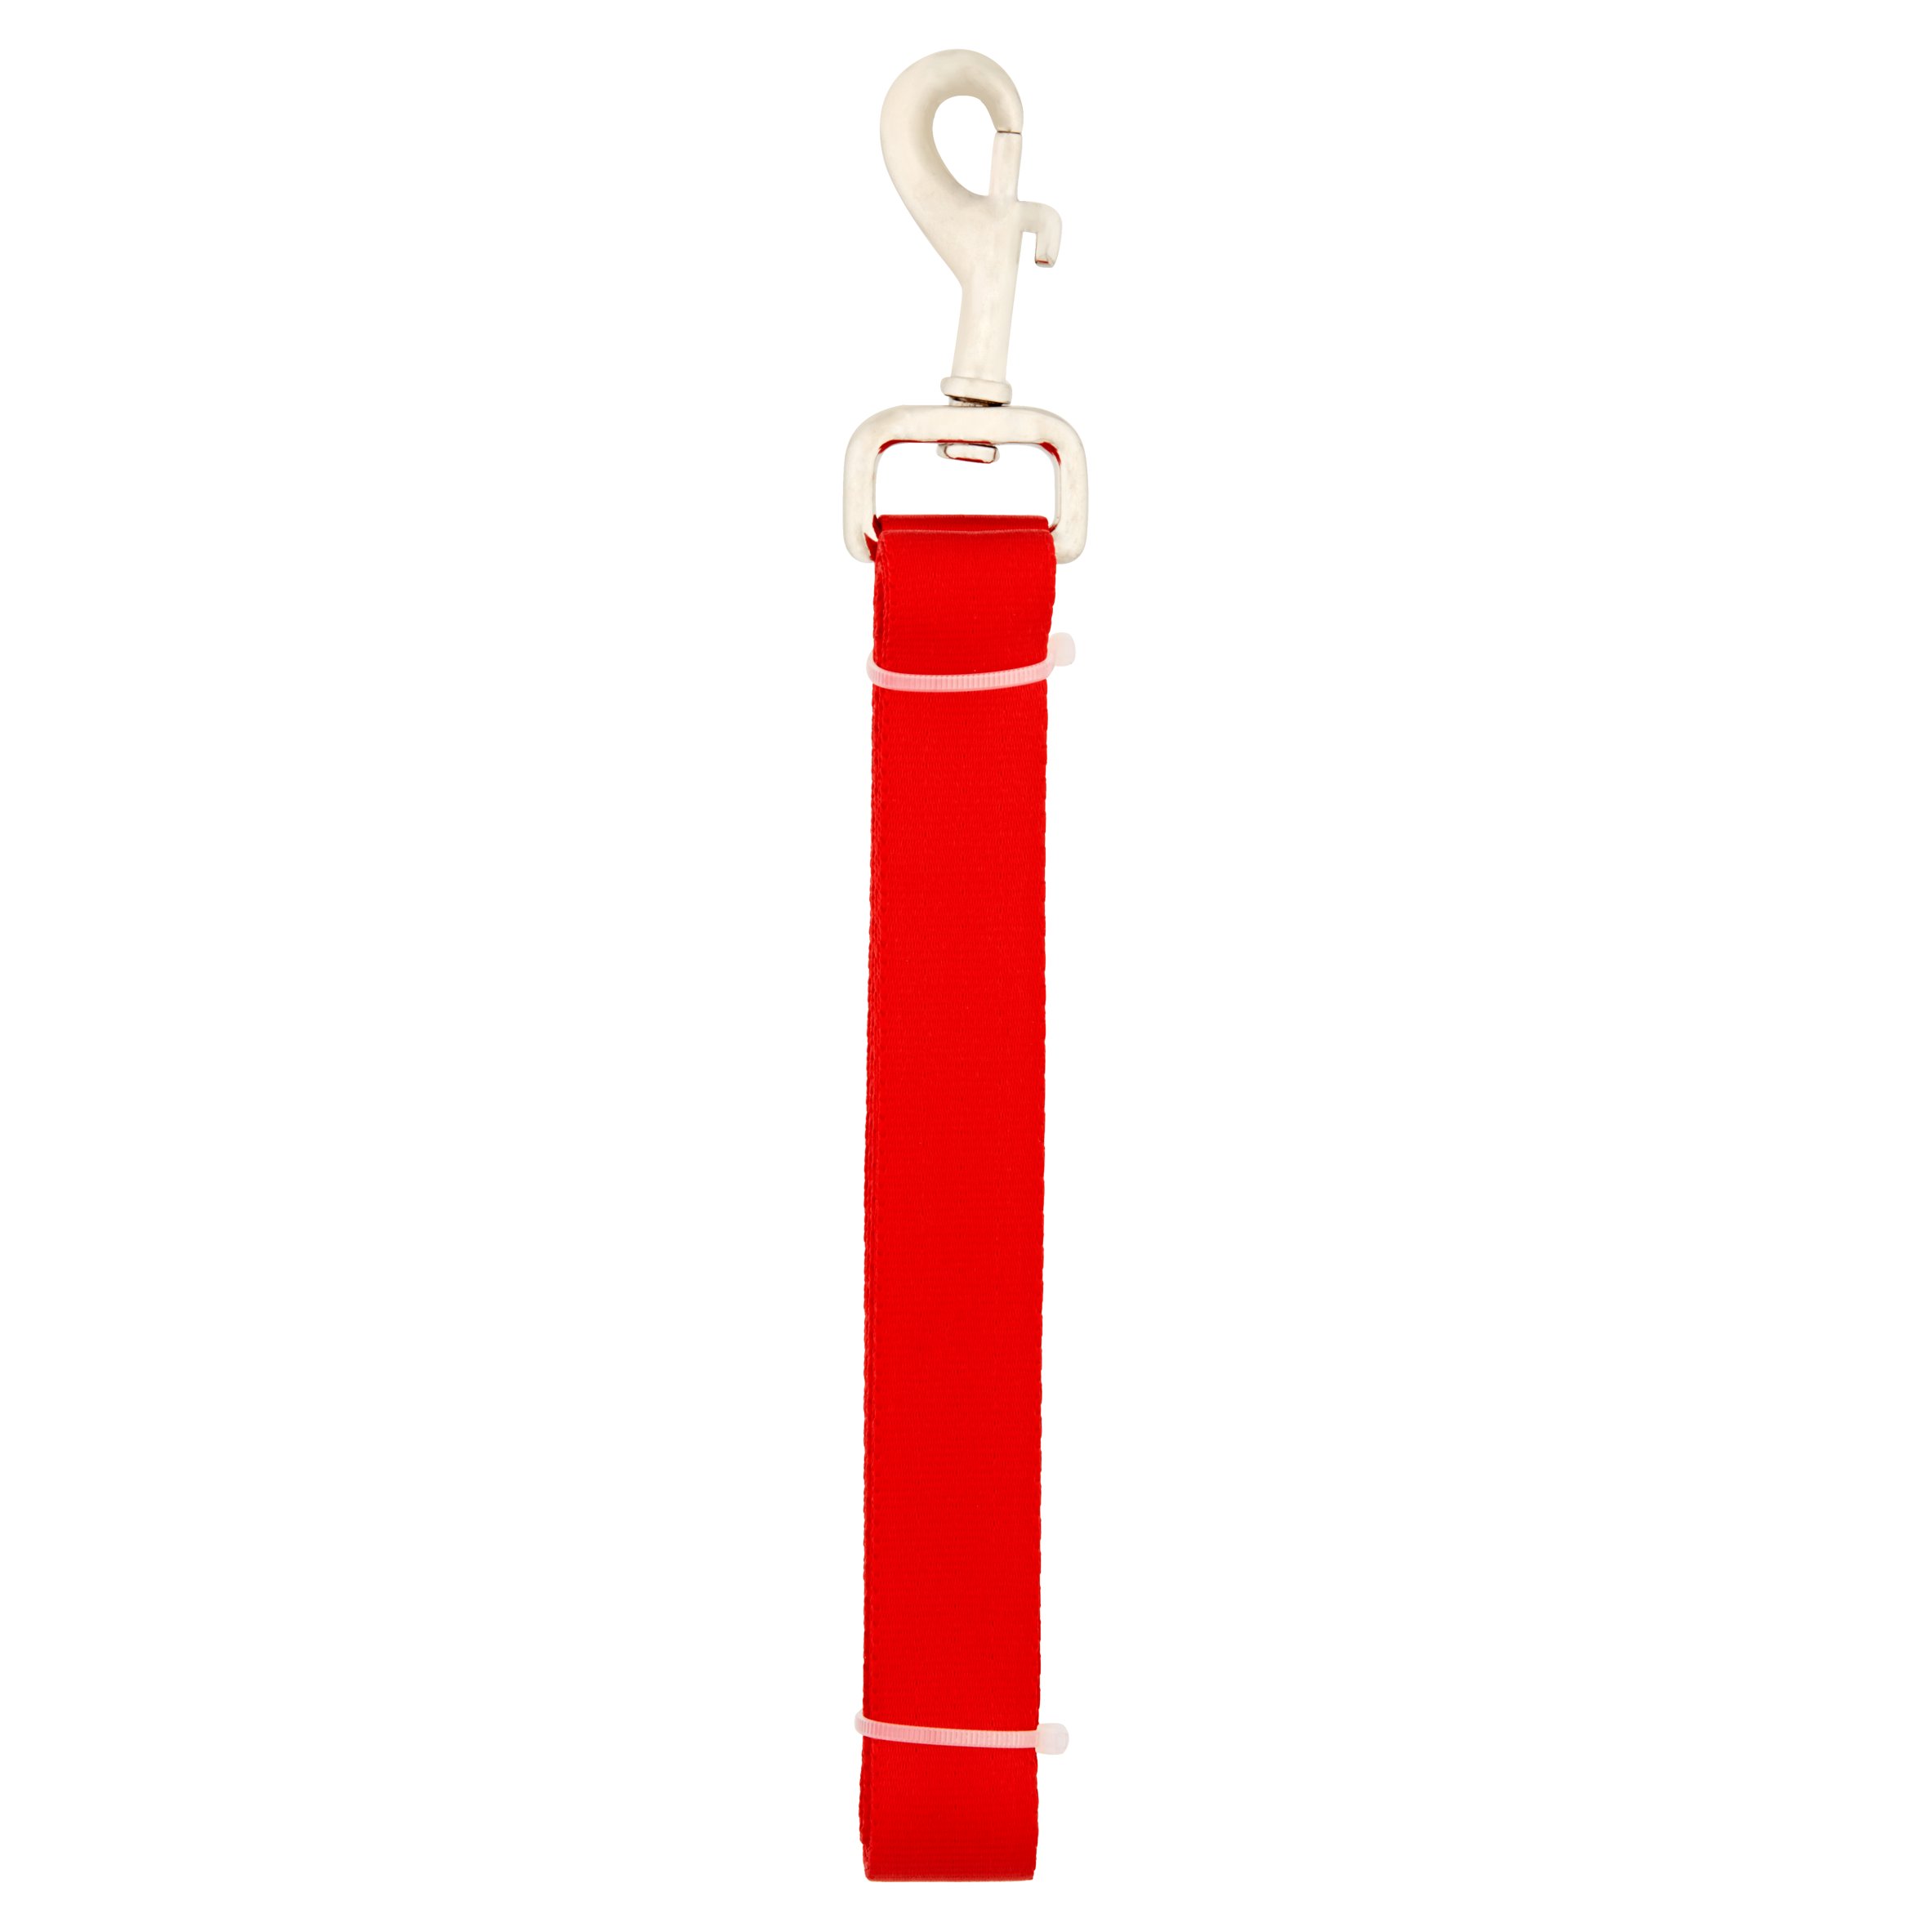 Pet Wear 5 ft. Large Red Leash - image 3 of 4